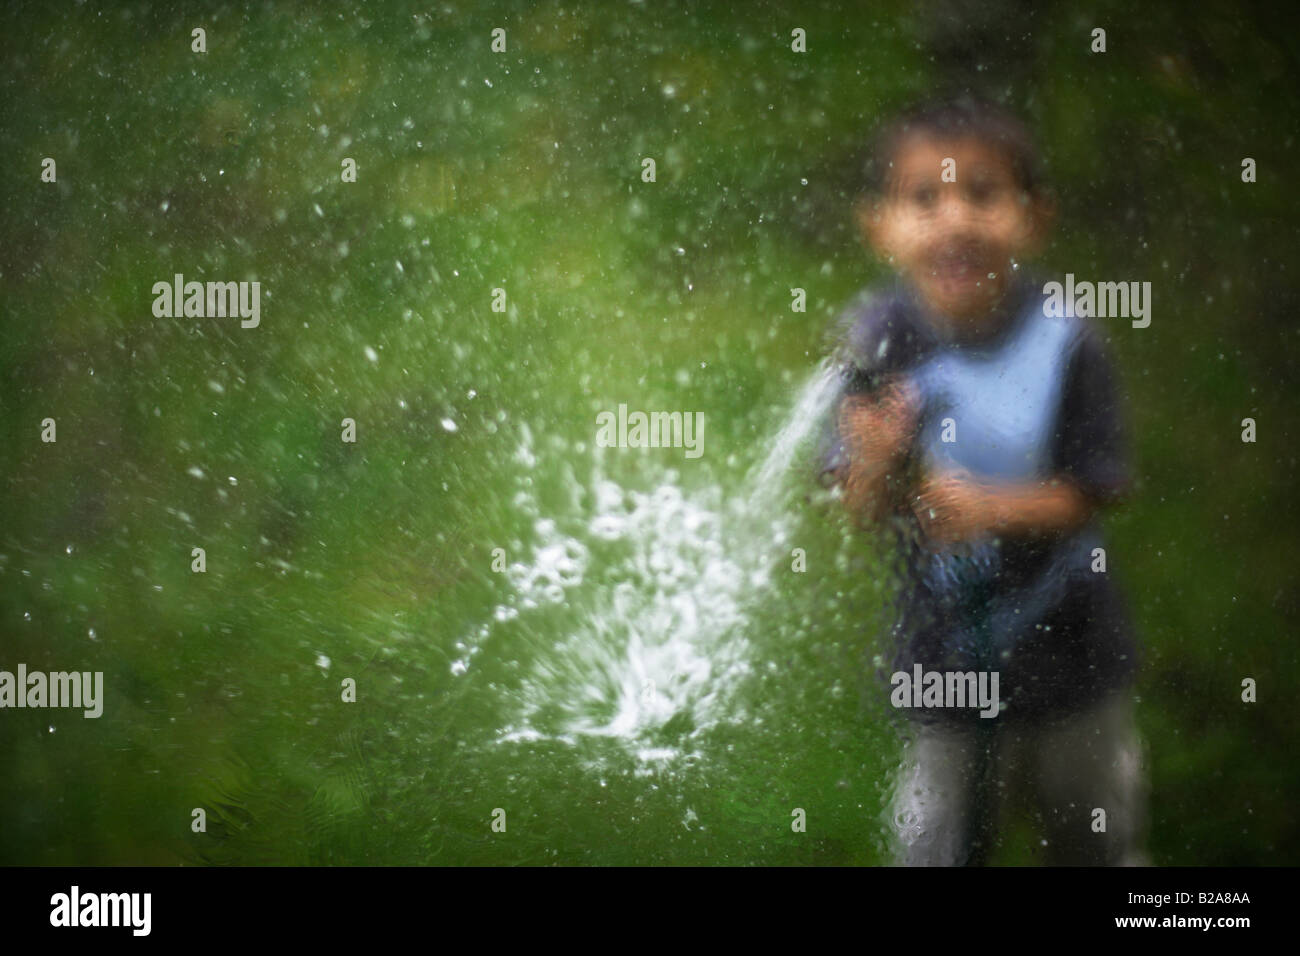 Hosepipe sprayed at a glass window Six year old boy Mixed race indian ethnic caucasian Stock Photo